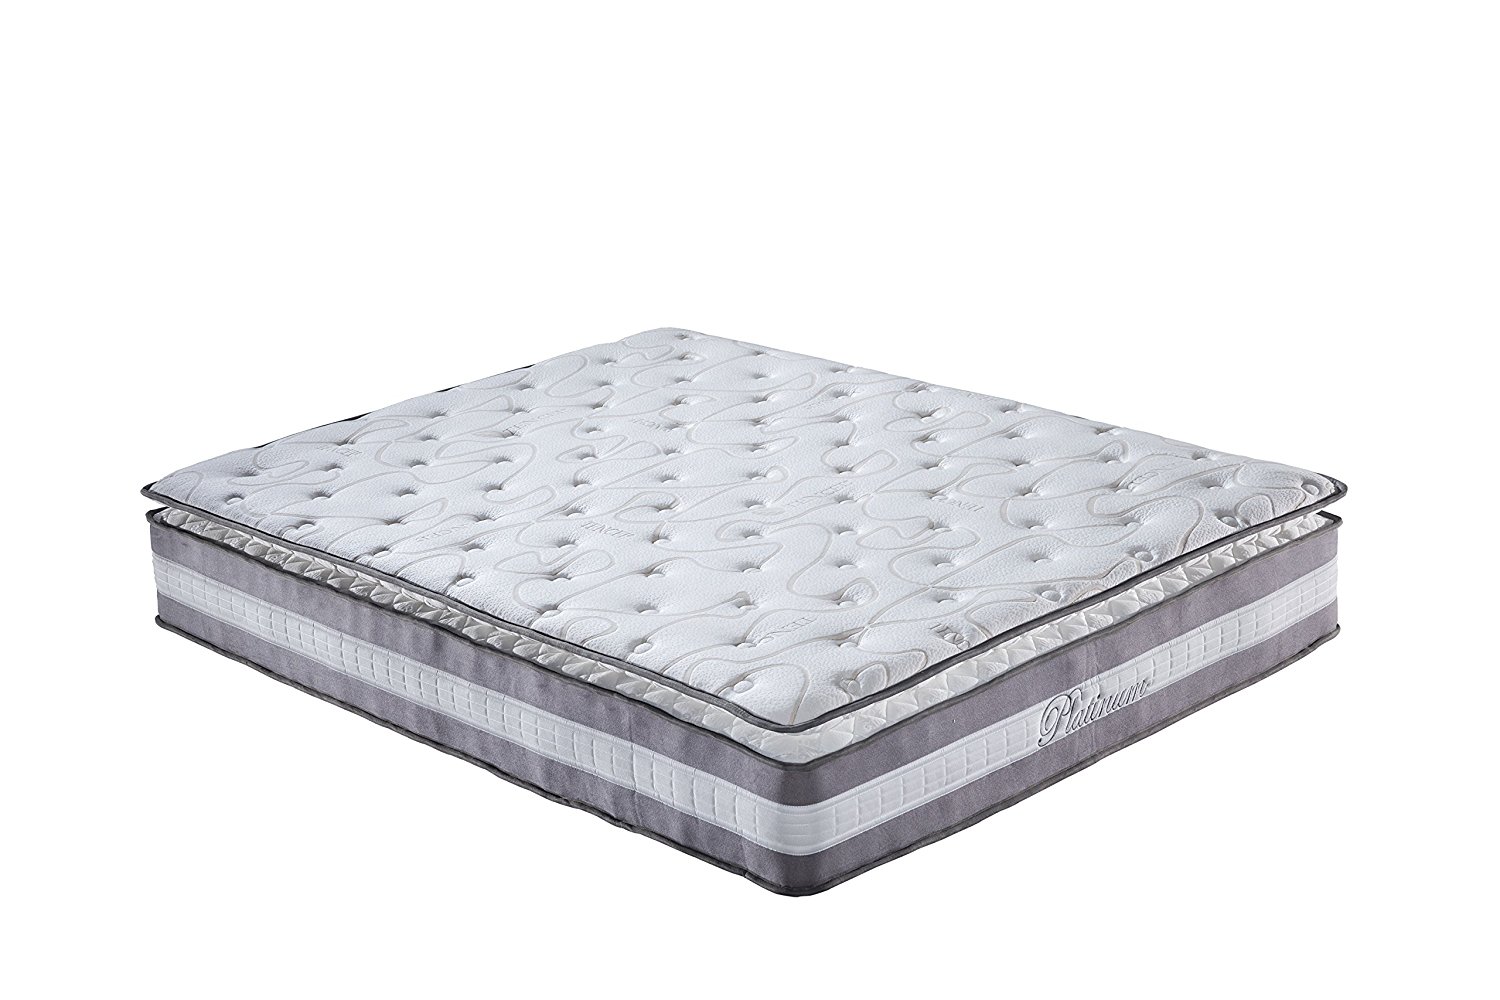 High Density 13-inch Hybrid Memory Foam and Innerspring Mattress with Plush Pillow Top (Full)